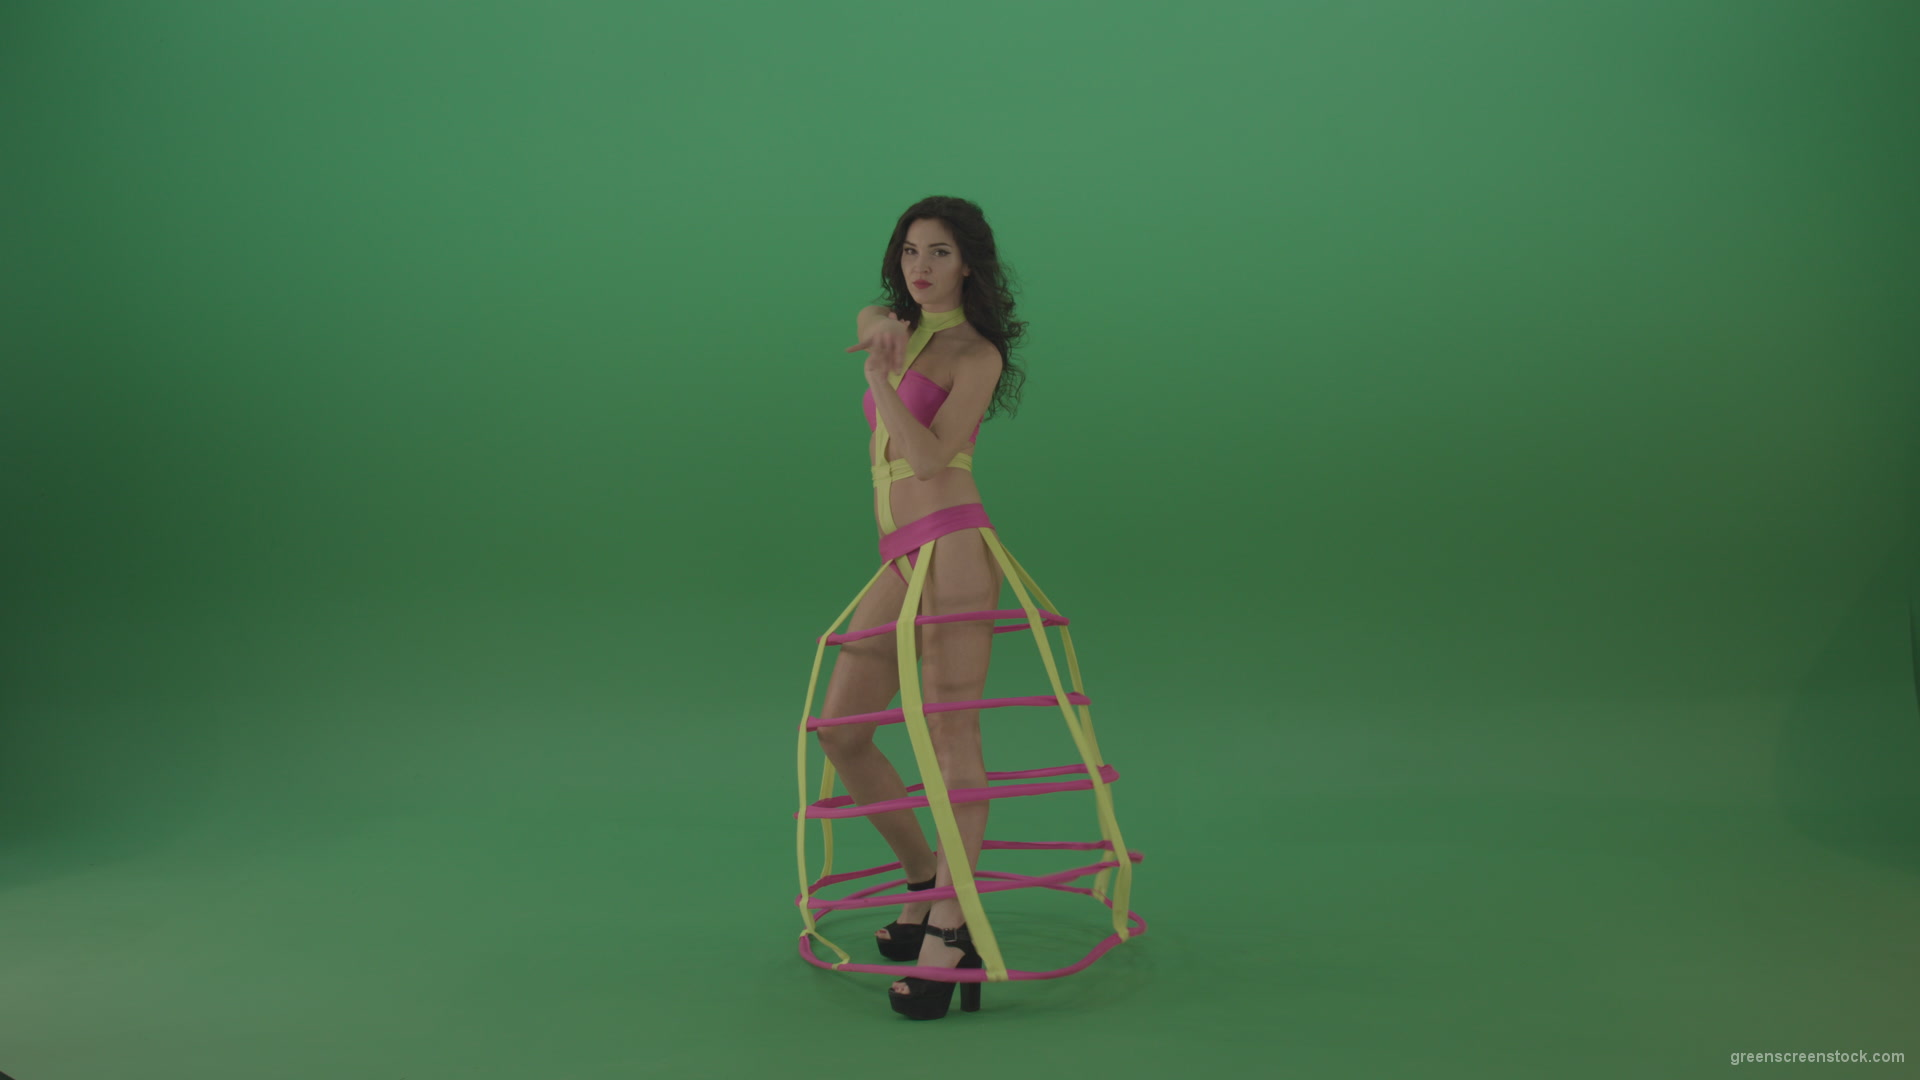 Top-costume-on-a-modern-elite-girl-with-circles-on-green-screen_006 Green Screen Stock